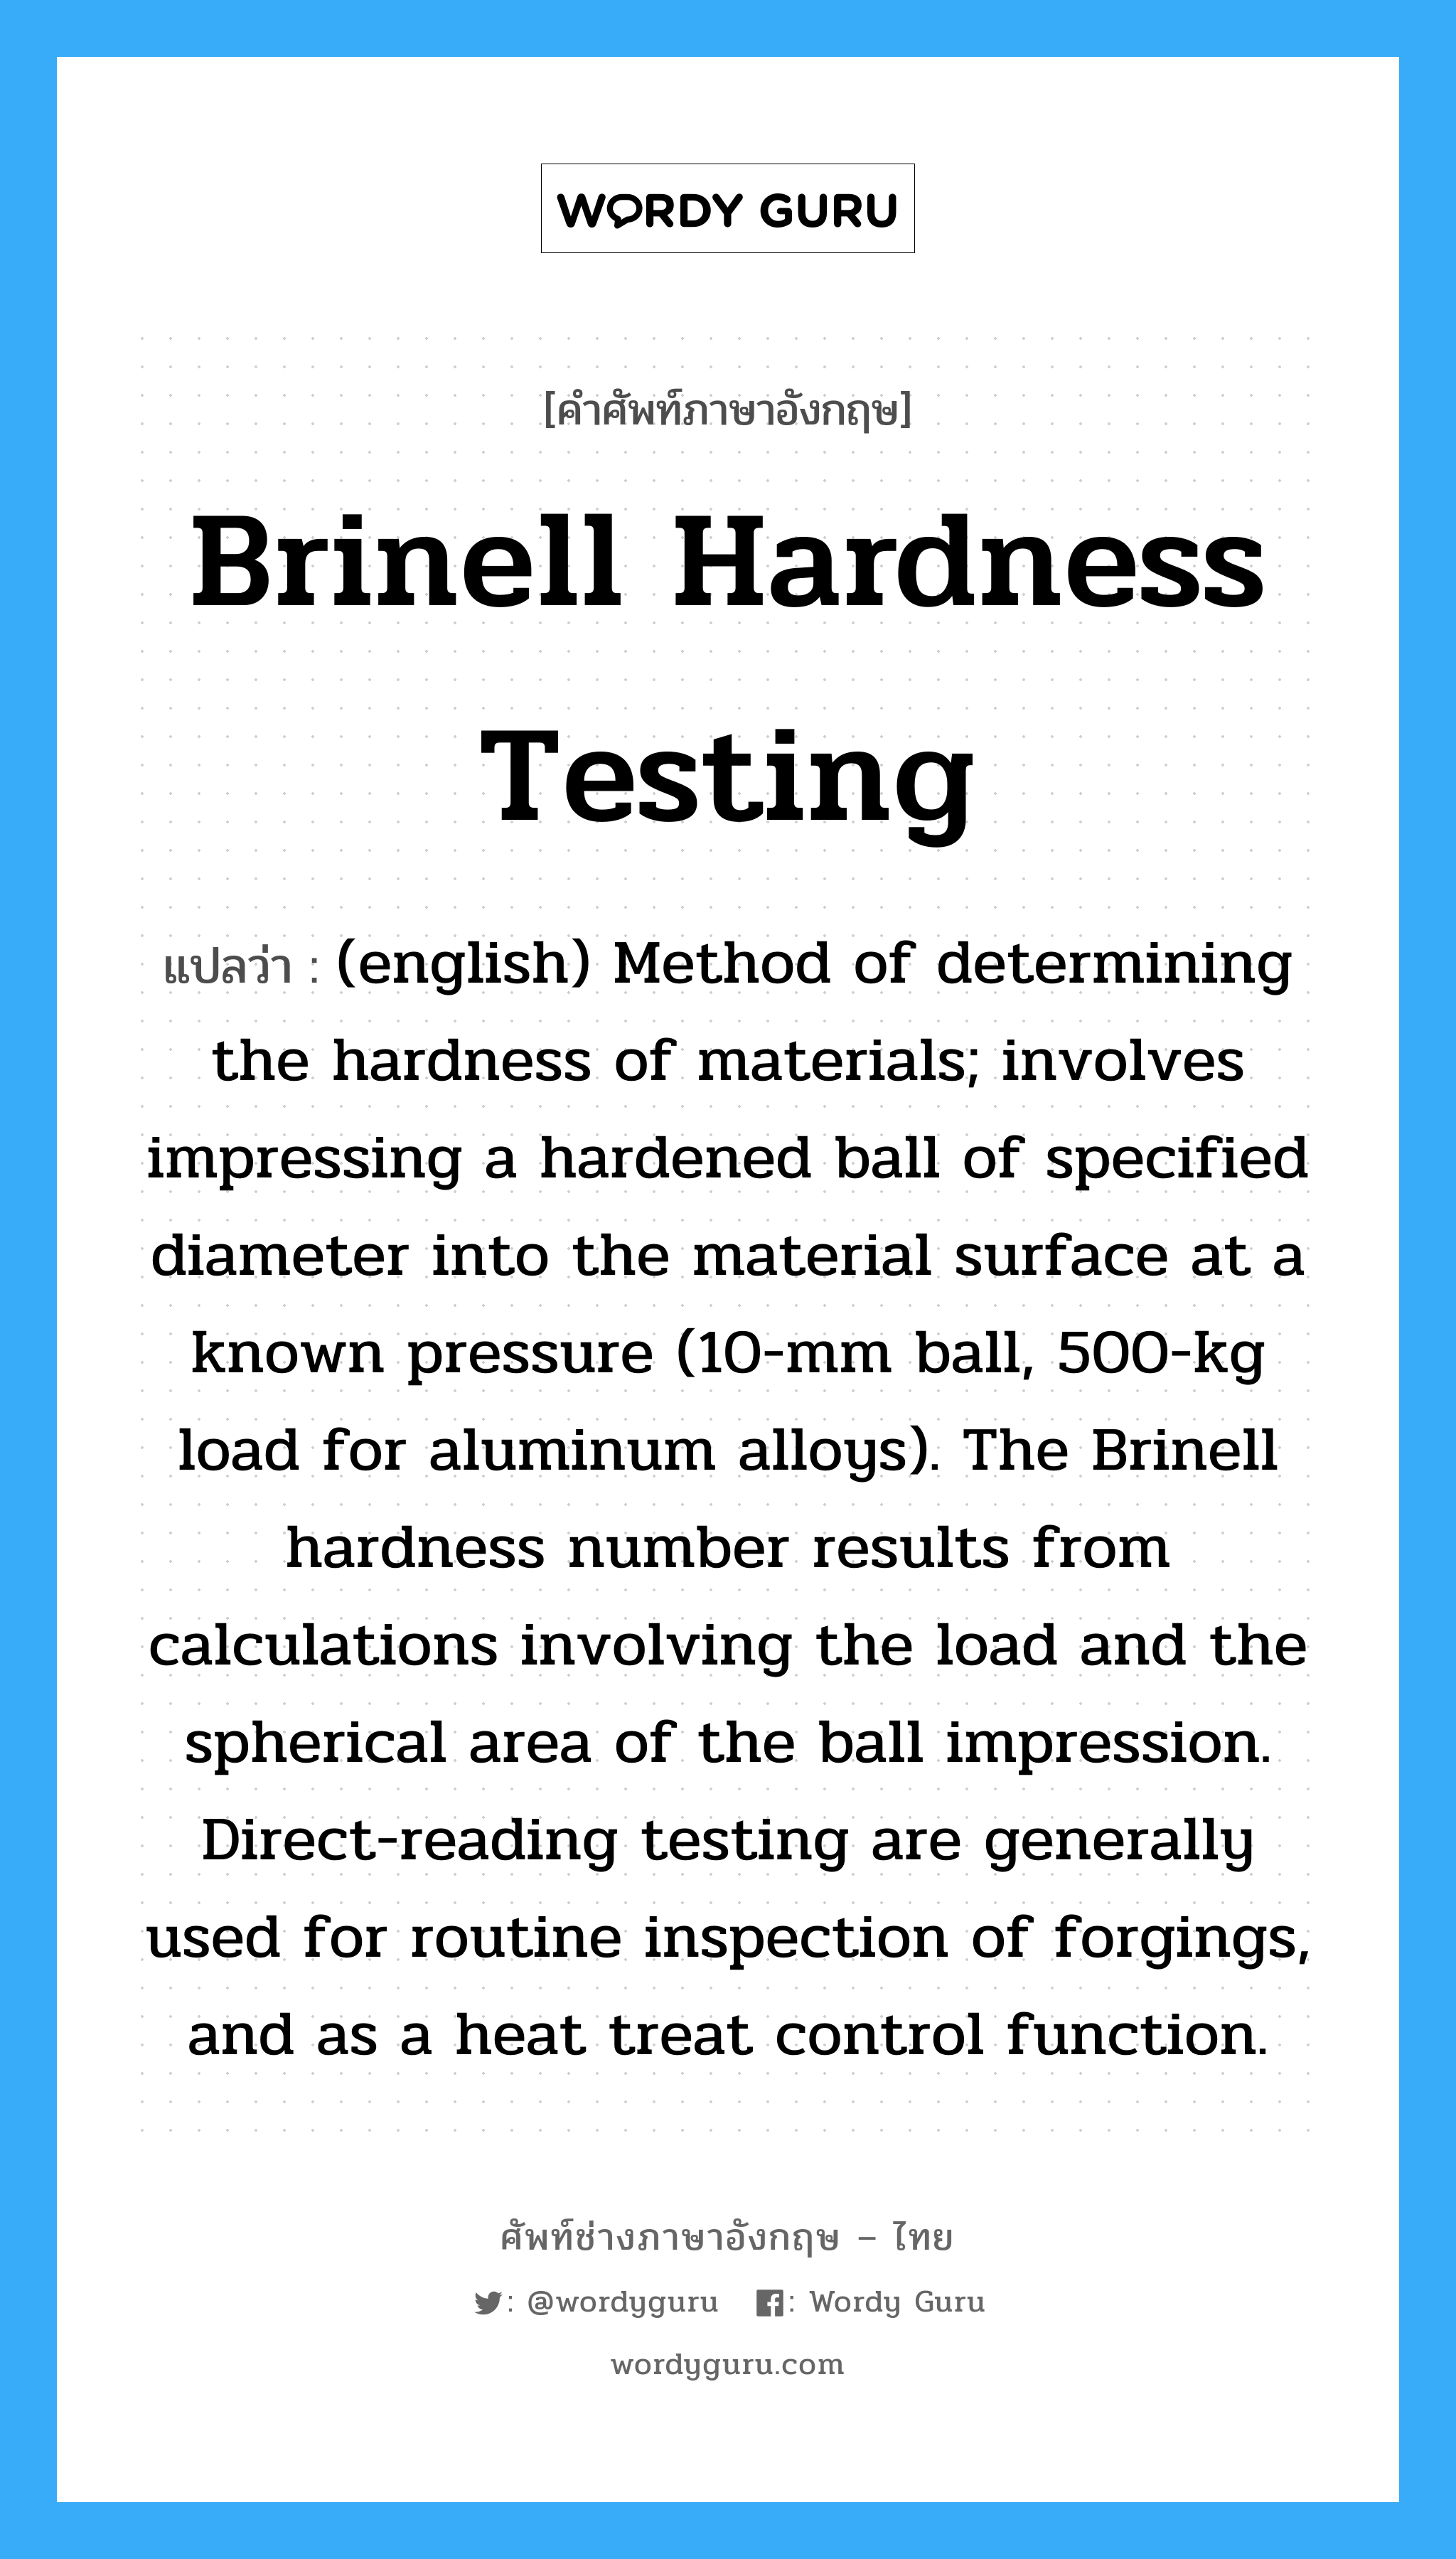 (english) Method of determining the hardness of materials; involves impressing a hardened ball of specified diameter into the material surface at a known pressure (10-mm ball, 500-kg load for aluminum alloys). The Brinell hardness number results from calculations involving the load and the spherical area of the ball impression. Direct-reading testing are generally used for routine inspection of forgings, and as a heat treat control function. ภาษาอังกฤษ?, คำศัพท์ช่างภาษาอังกฤษ - ไทย (english) Method of determining the hardness of materials; involves impressing a hardened ball of specified diameter into the material surface at a known pressure (10-mm ball, 500-kg load for aluminum alloys). The Brinell hardness number results from calculations involving the load and the spherical area of the ball impression. Direct-reading testing are generally used for routine inspection of forgings, and as a heat treat control function. คำศัพท์ภาษาอังกฤษ (english) Method of determining the hardness of materials; involves impressing a hardened ball of specified diameter into the material surface at a known pressure (10-mm ball, 500-kg load for aluminum alloys). The Brinell hardness number results from calculations involving the load and the spherical area of the ball impression. Direct-reading testing are generally used for routine inspection of forgings, and as a heat treat control function. แปลว่า Brinell Hardness Testing